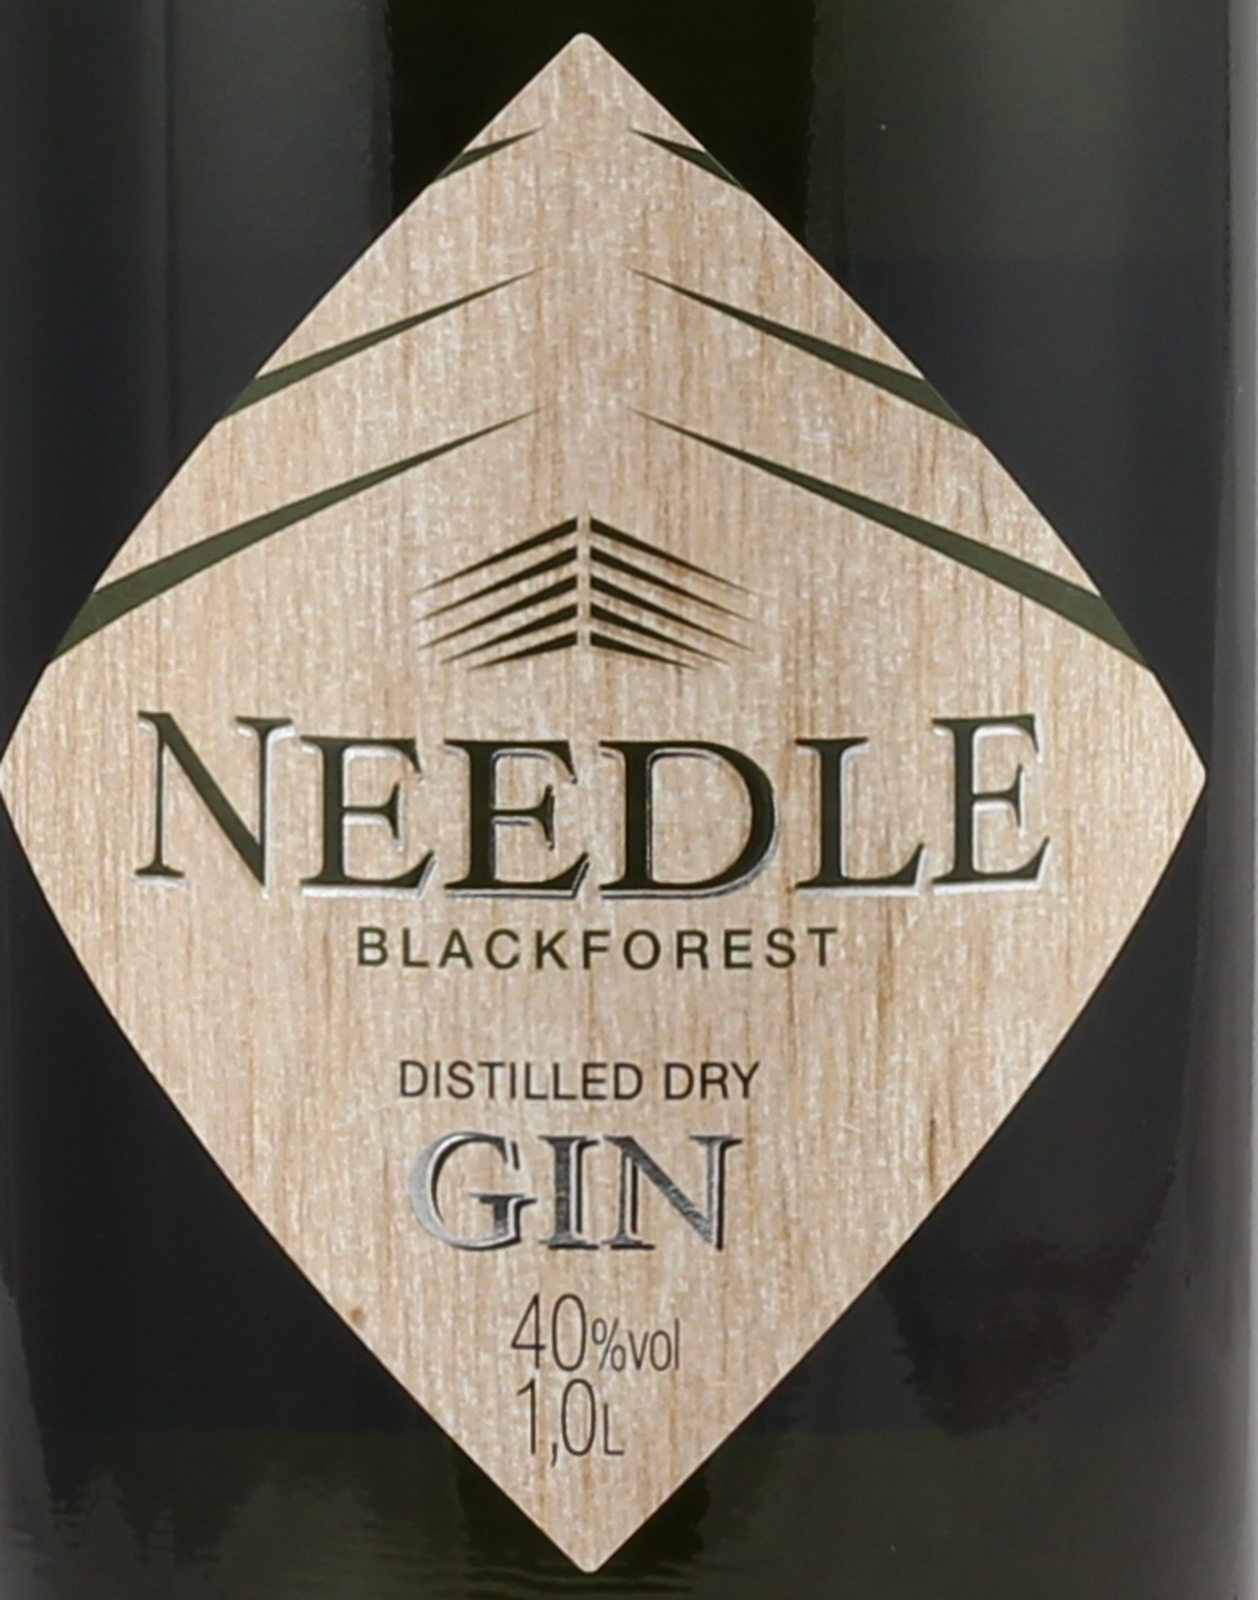 Onlineshop Dry hier Forest im Needle Black Gin